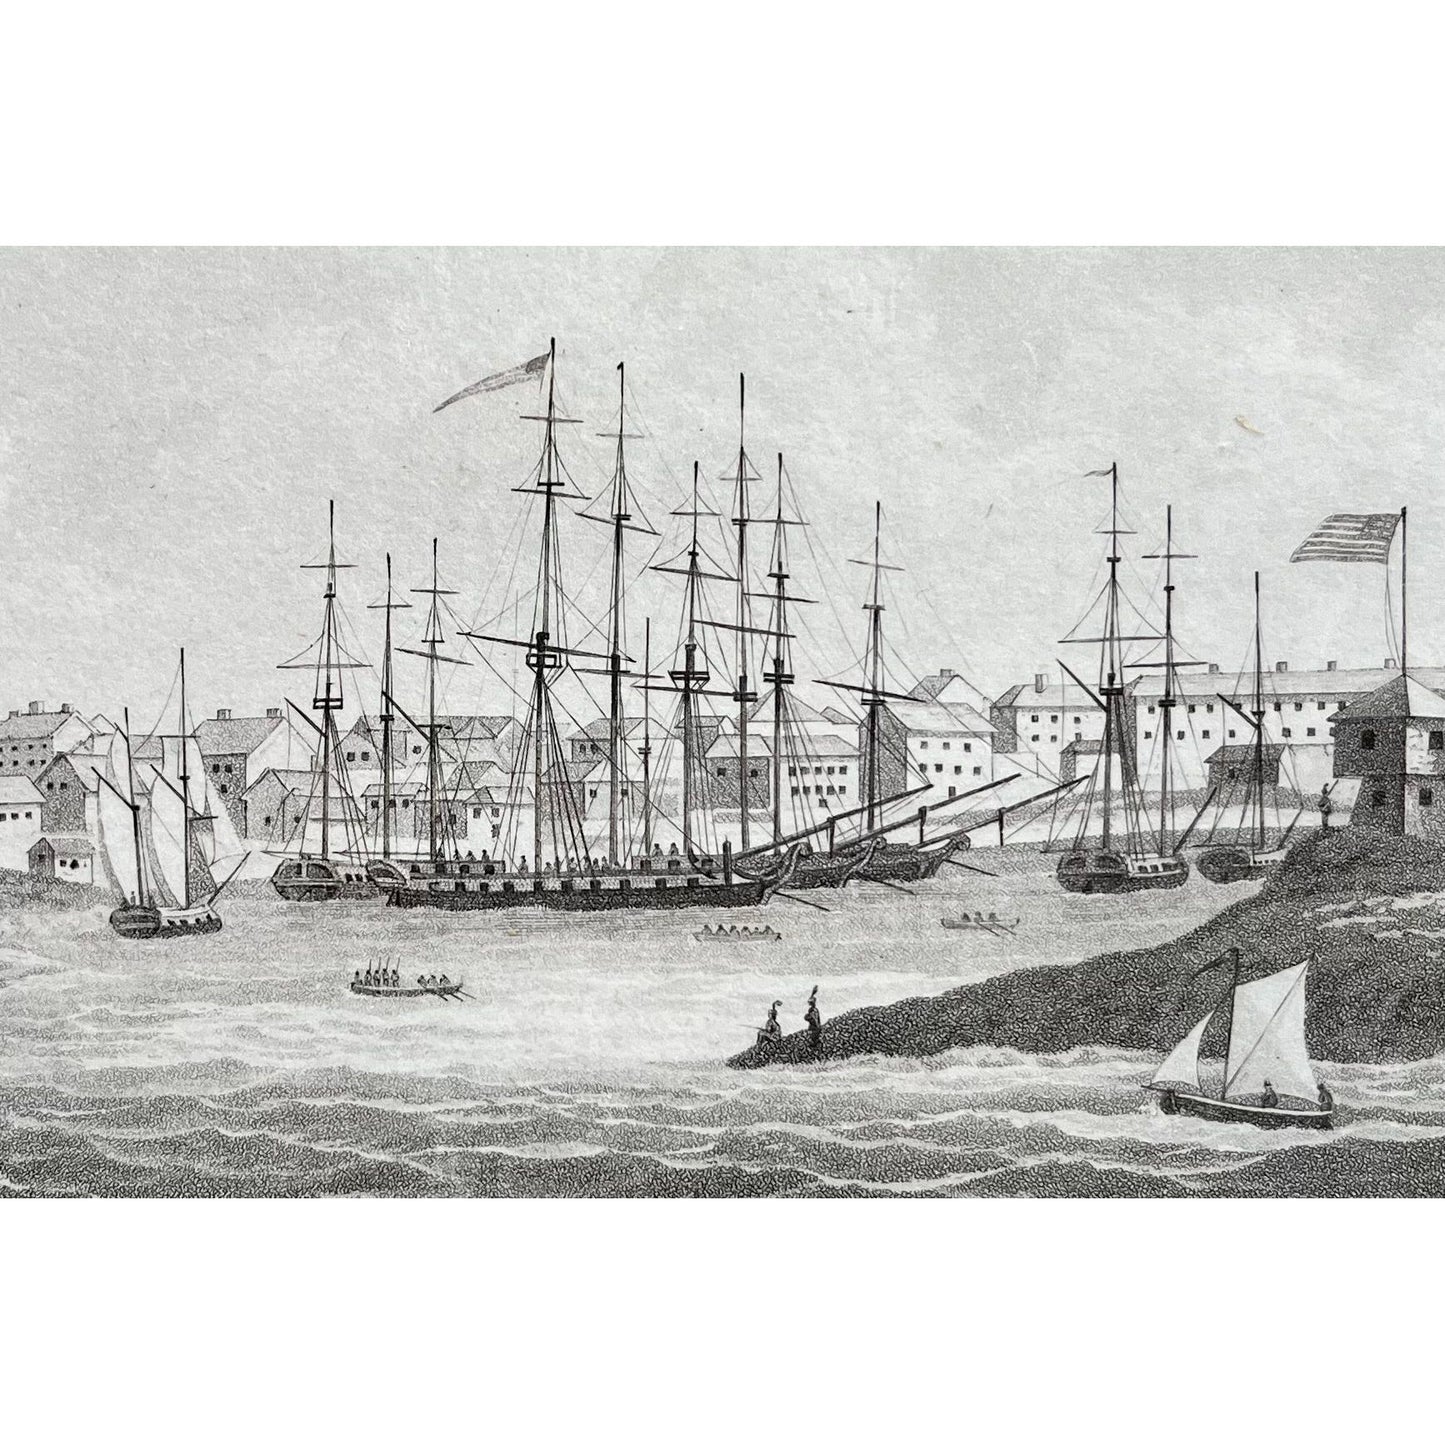 Black and white matted print of Sackett’s Harbour on Lake Ontario with ships and soldiers, American flags, troops and more, for sale by Victoria Cooper Antique Prints